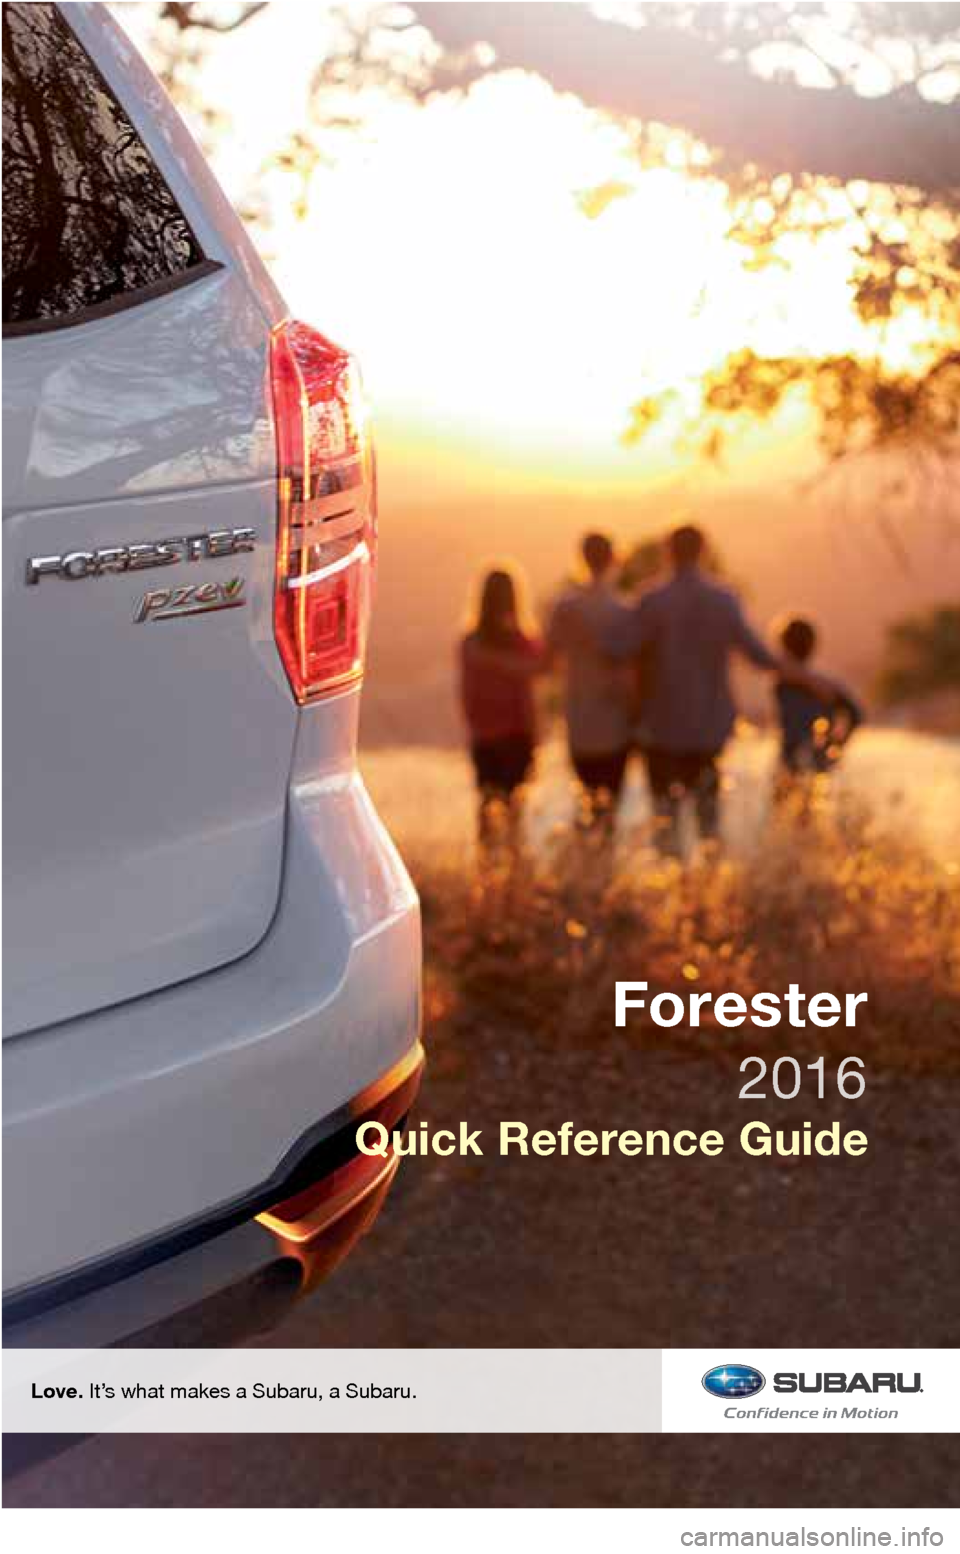 SUBARU FORESTER 2016 SJ / 4.G Quick Reference Guide Love. It’s what makes a Subaru, a Subaru.
Quick Reference Guide
Forester
1980916_16a_Subaru_Forester_QRG_061015.indd   26/10/15   10:59 AM 
2016  